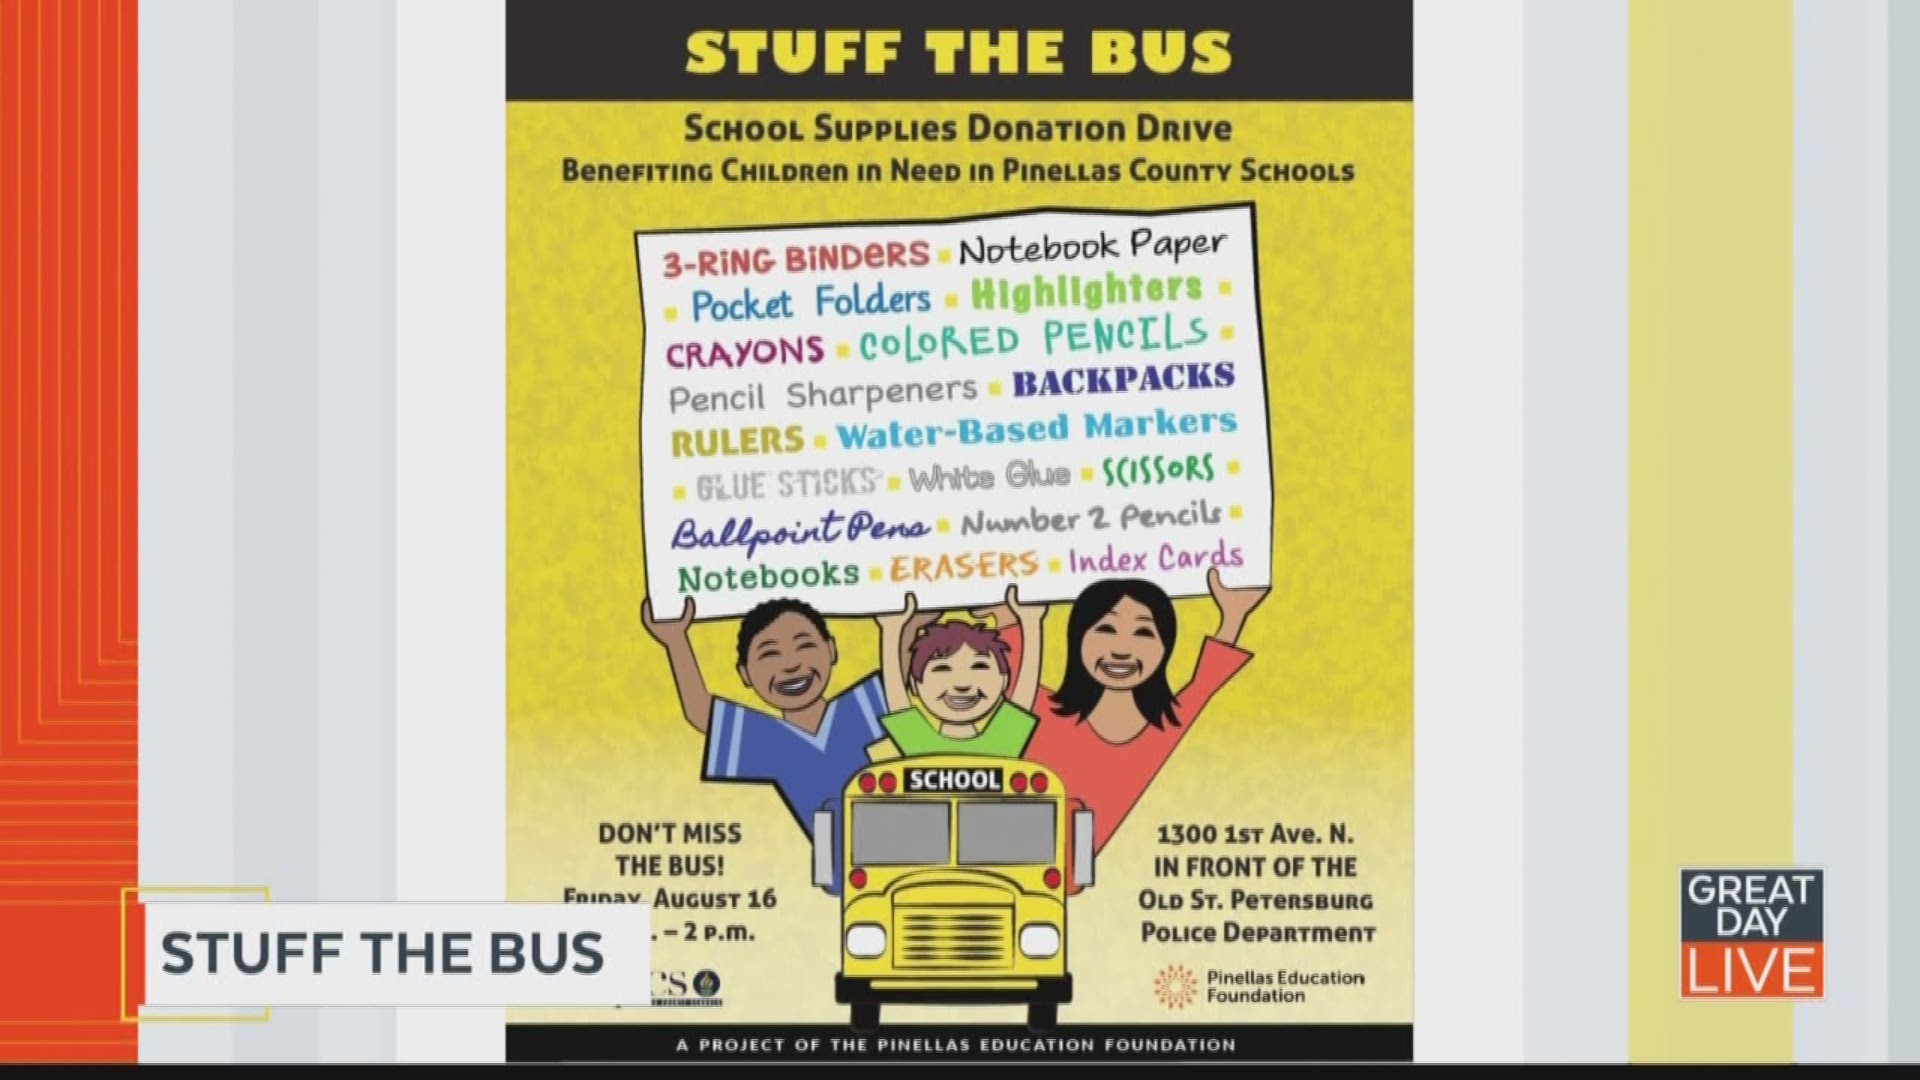 The Pinellas Education Foundation's Stuff the Bus event is from 8 a.m. to 2 p.m. Aug. 16 at 1300 1st Ave. N. in downtown St. Pete. Drop off school supplies like notebooks, pencils, pens, backpacks and more.